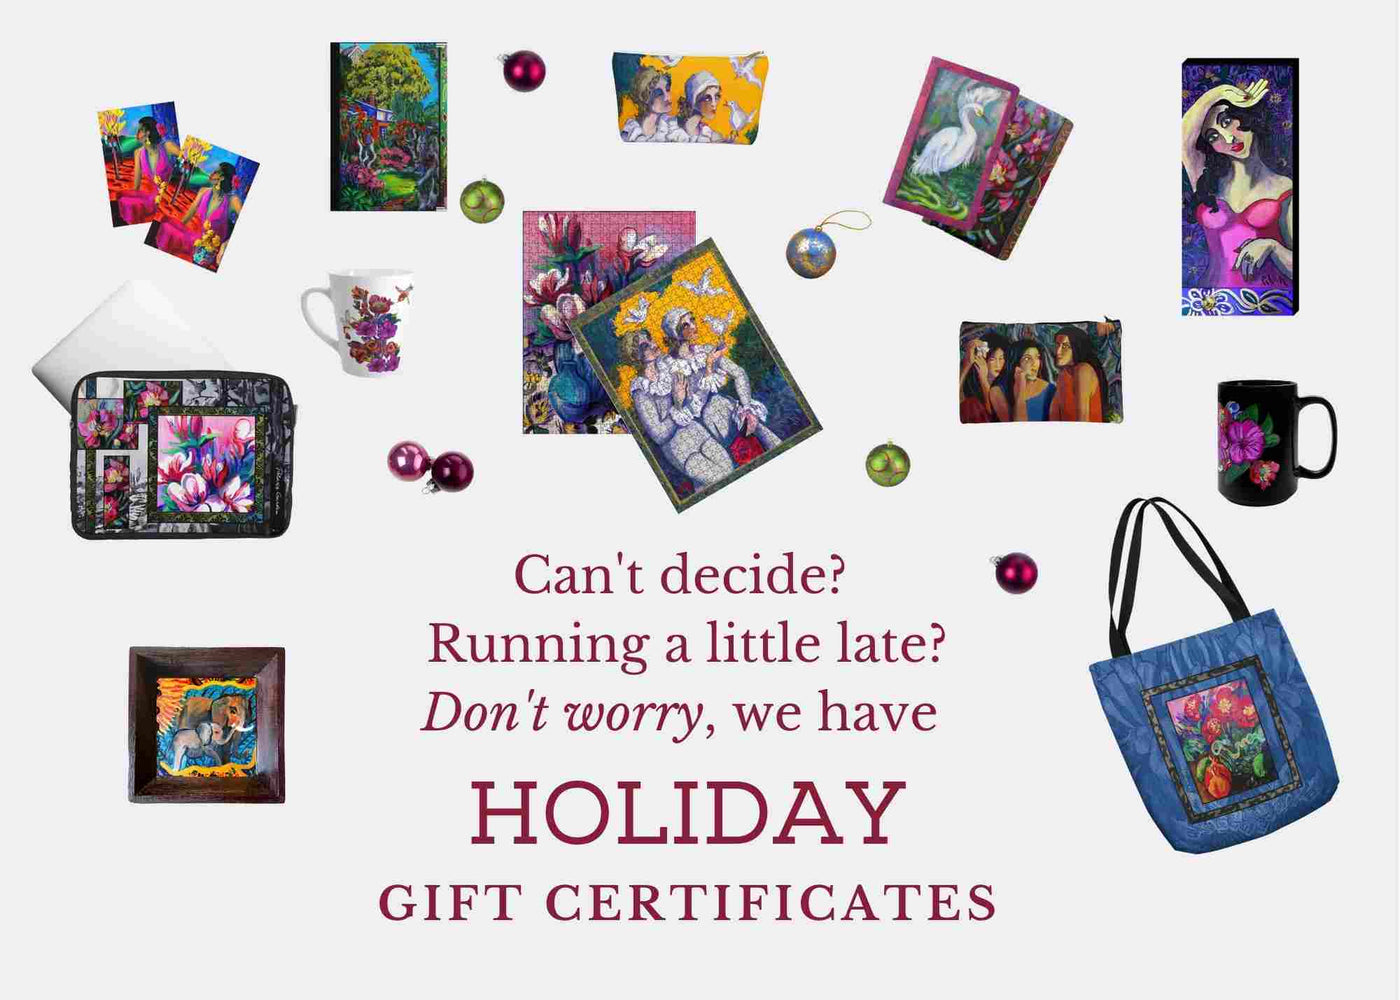 Gift Certificates - from $30 - $150